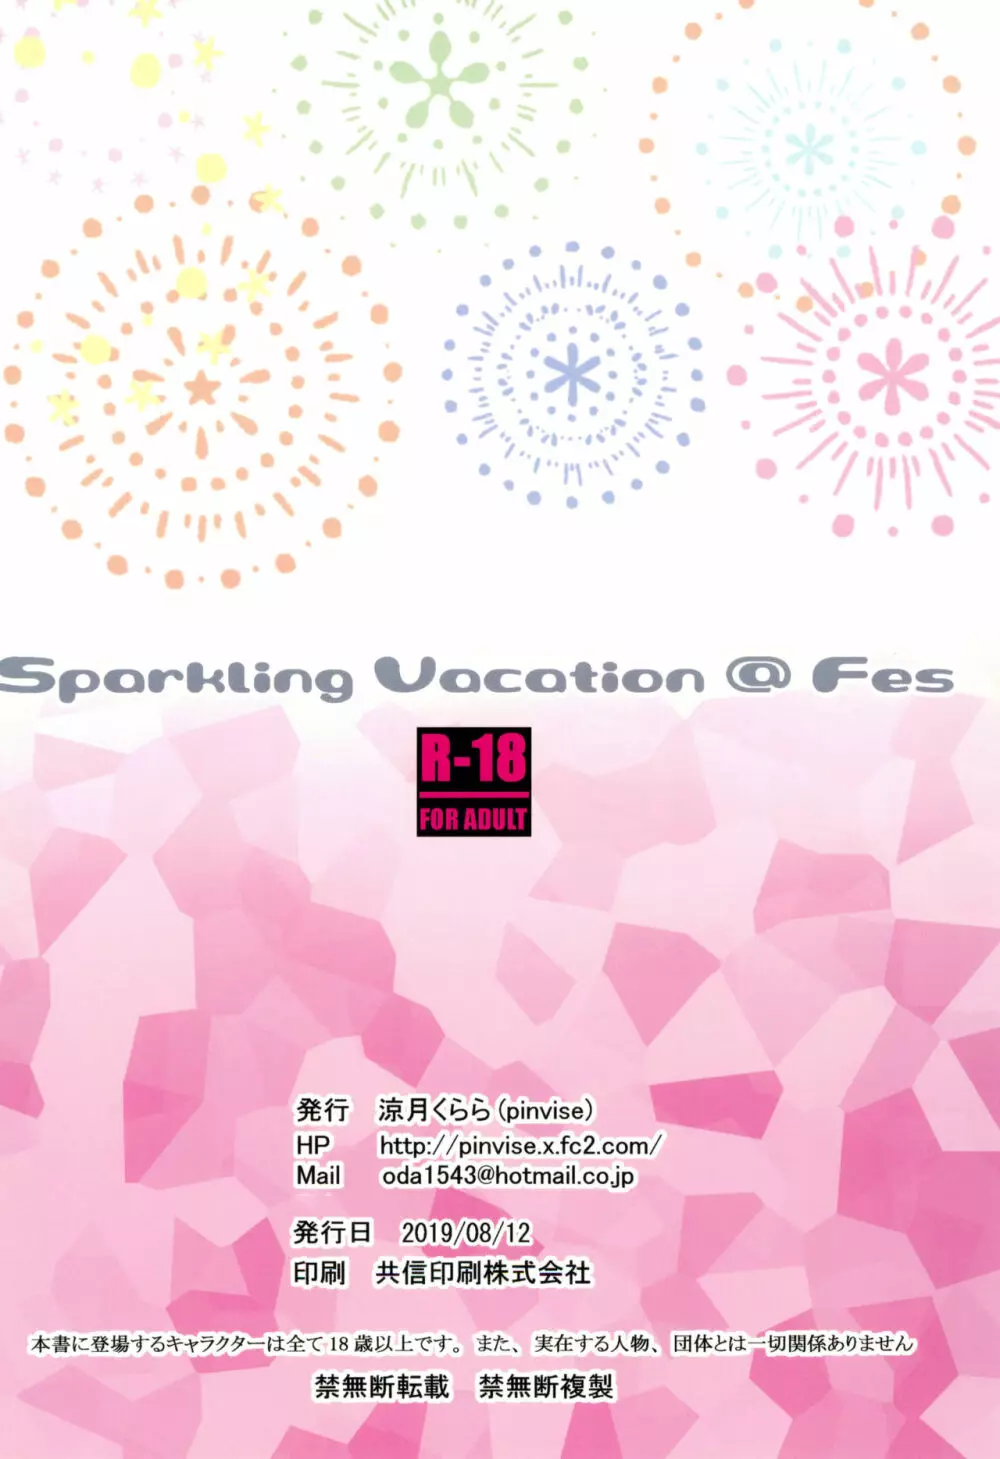 Sparkling Vacation @ Fes 16ページ